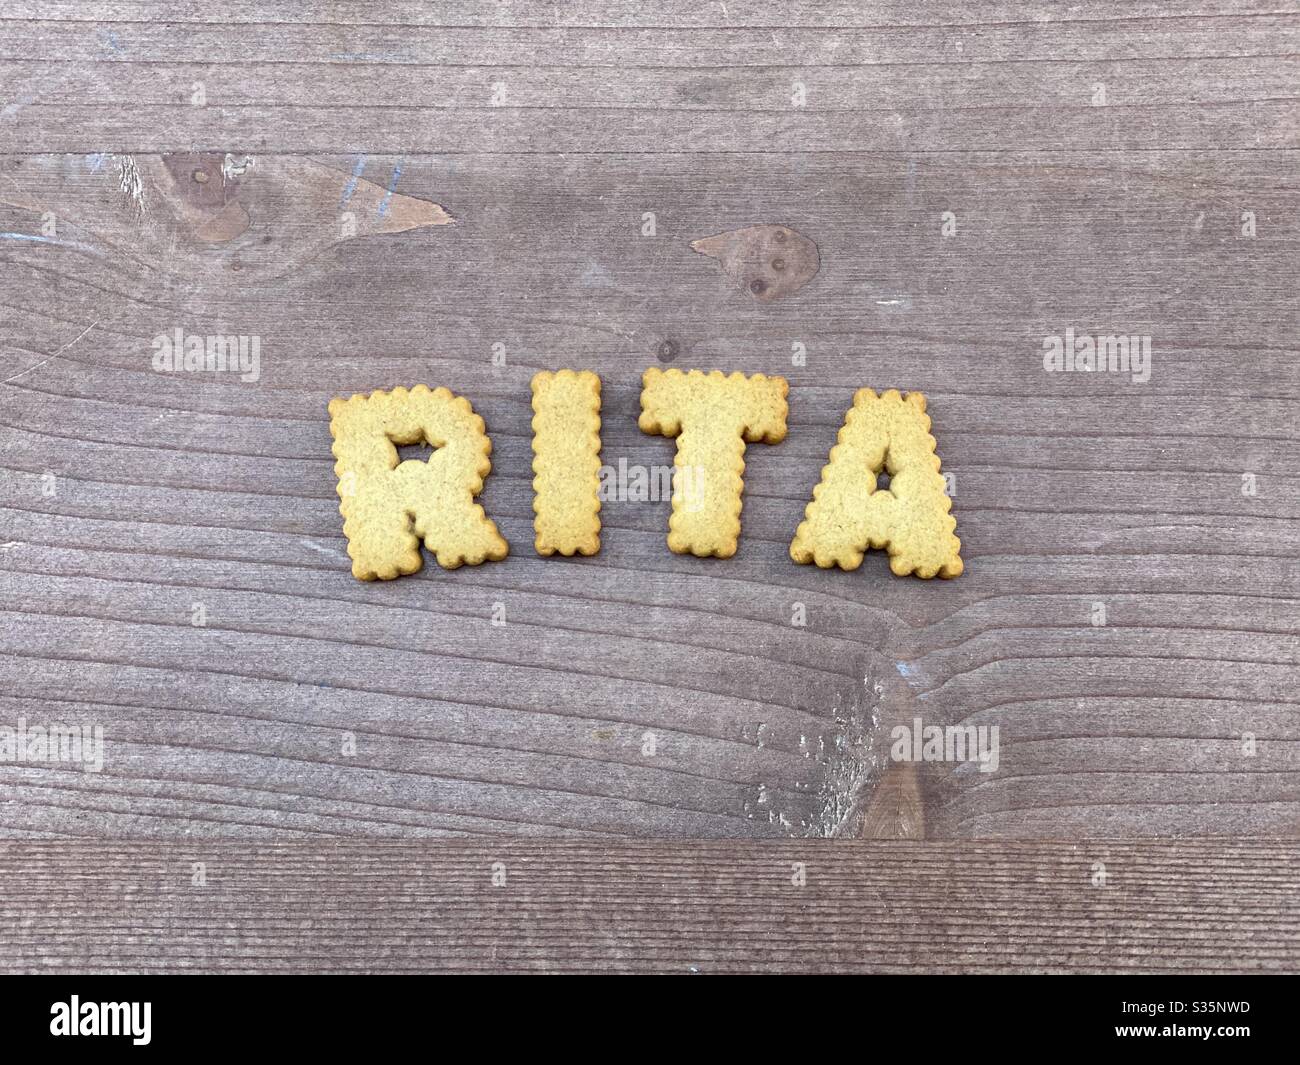 Rita, female given name composed with biscuit letters over a wooden board Stock Photo